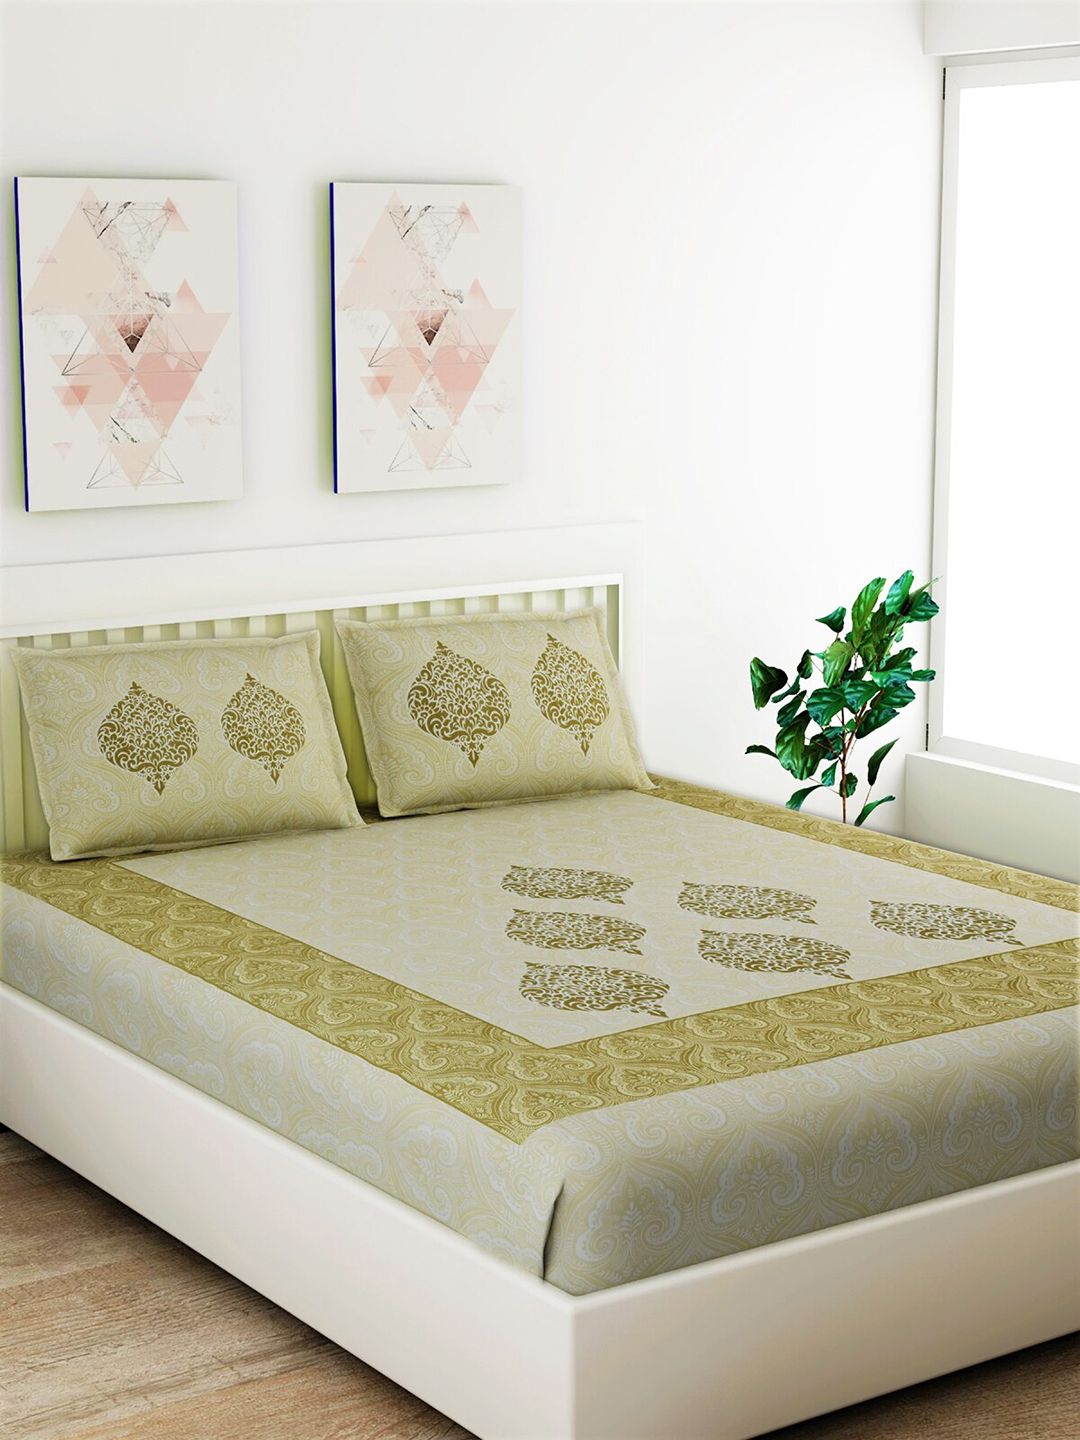 Salona Bichona Green & Beige Ethnic Motifs 120 TC Cotton 1 King Bedsheet with 2 Pillow Covers Price in India